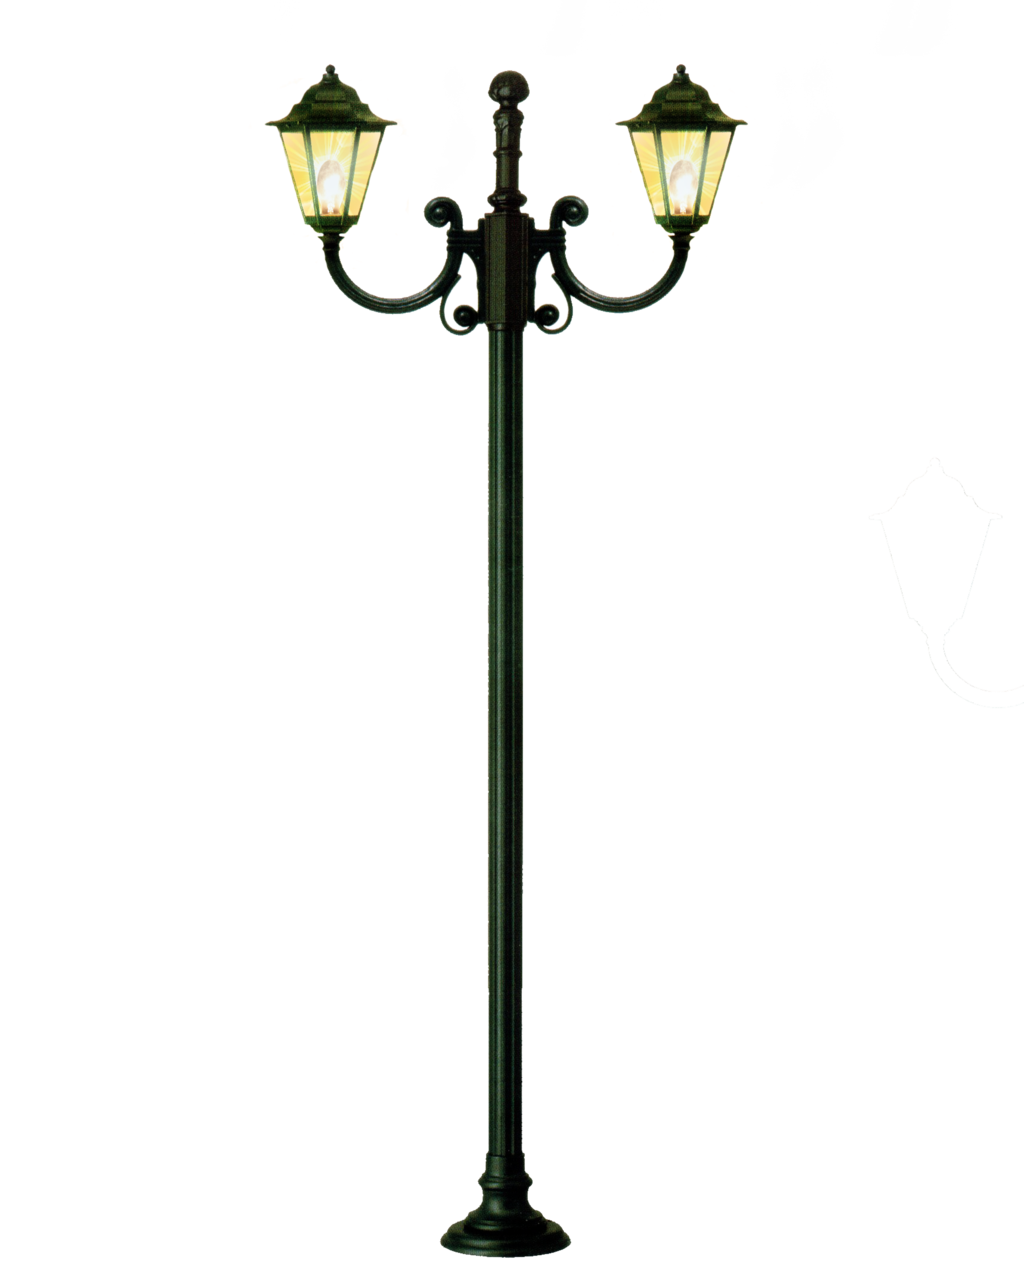 Wall Lamp Png by Moonglowlill